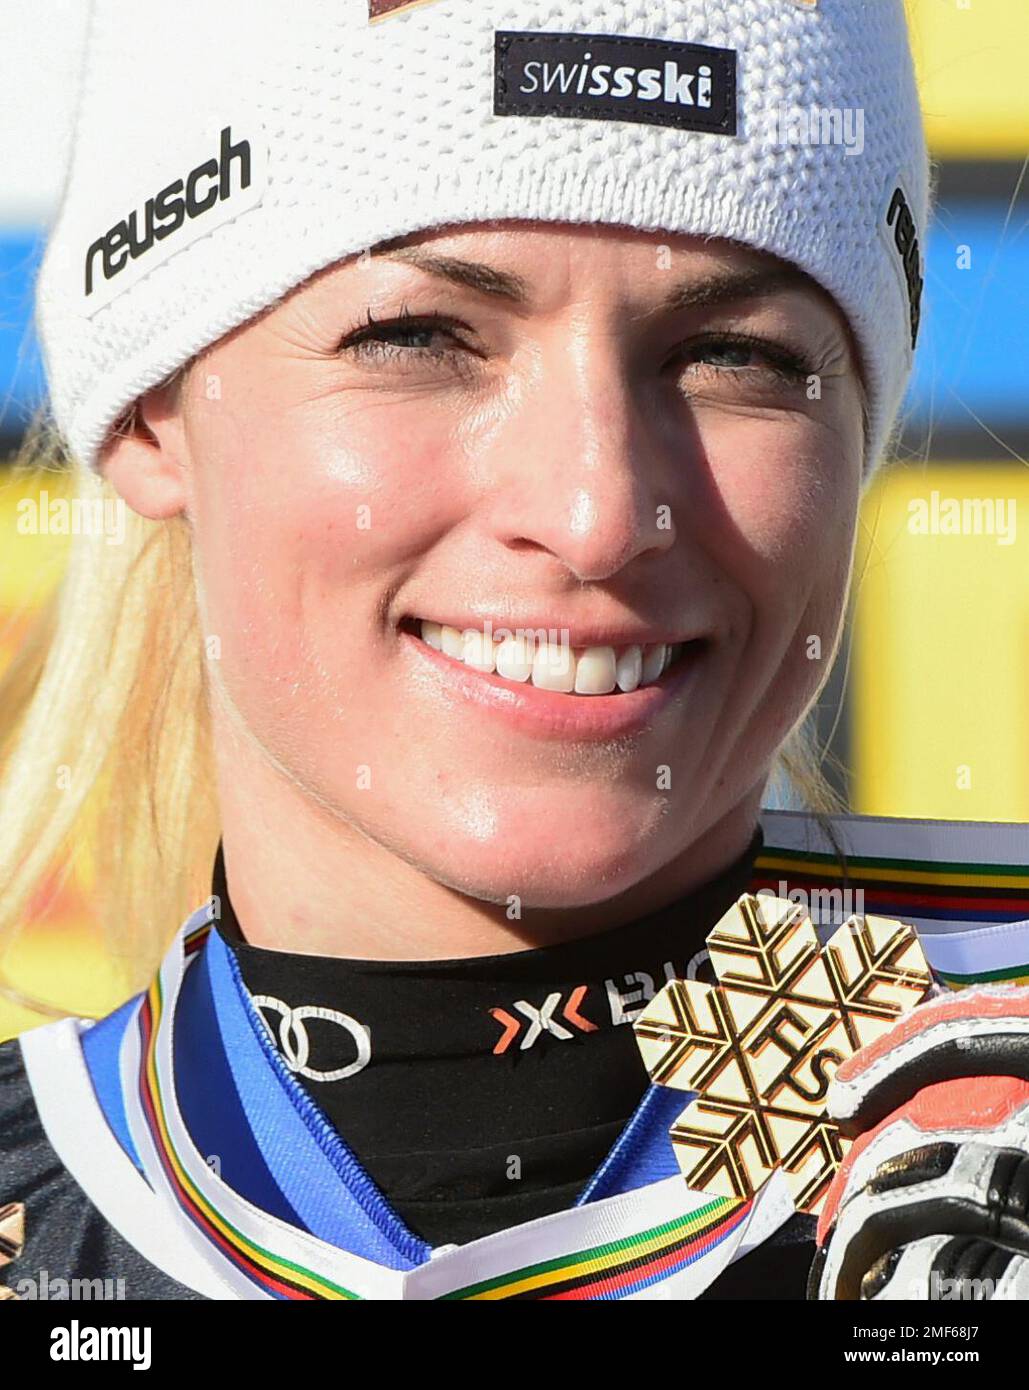 Switzerland's Lara Gut-Behrami shows her gold medal in the women's super-G, at the alpine ski World Championships, in Cortina d'Ampezzo, Italy, Thursday, Feb. 11, 2021. (AP Photo/Marco Tacca) Stock Photo